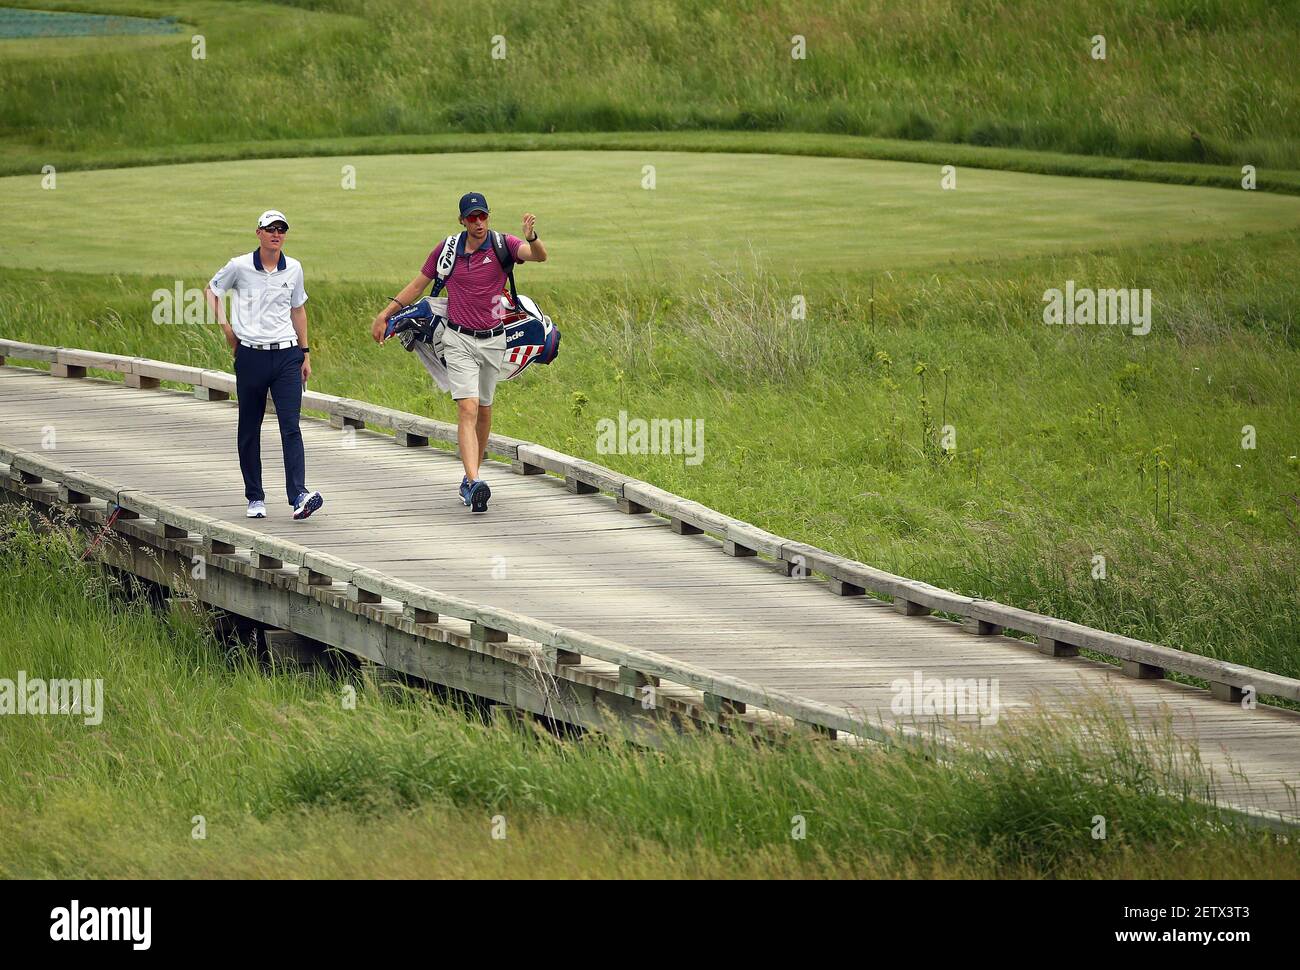 Jun 12, 2017; Erin, WI, USA; Jordan Niebrugge walks off the second tee during the opening practice round of the U.S. Open golf tournament at Erin Hills. Mandatory Credit: Rob Schumacher-USA TODAY Sports *** Please Use Credit from Credit Field *** Stock Photo